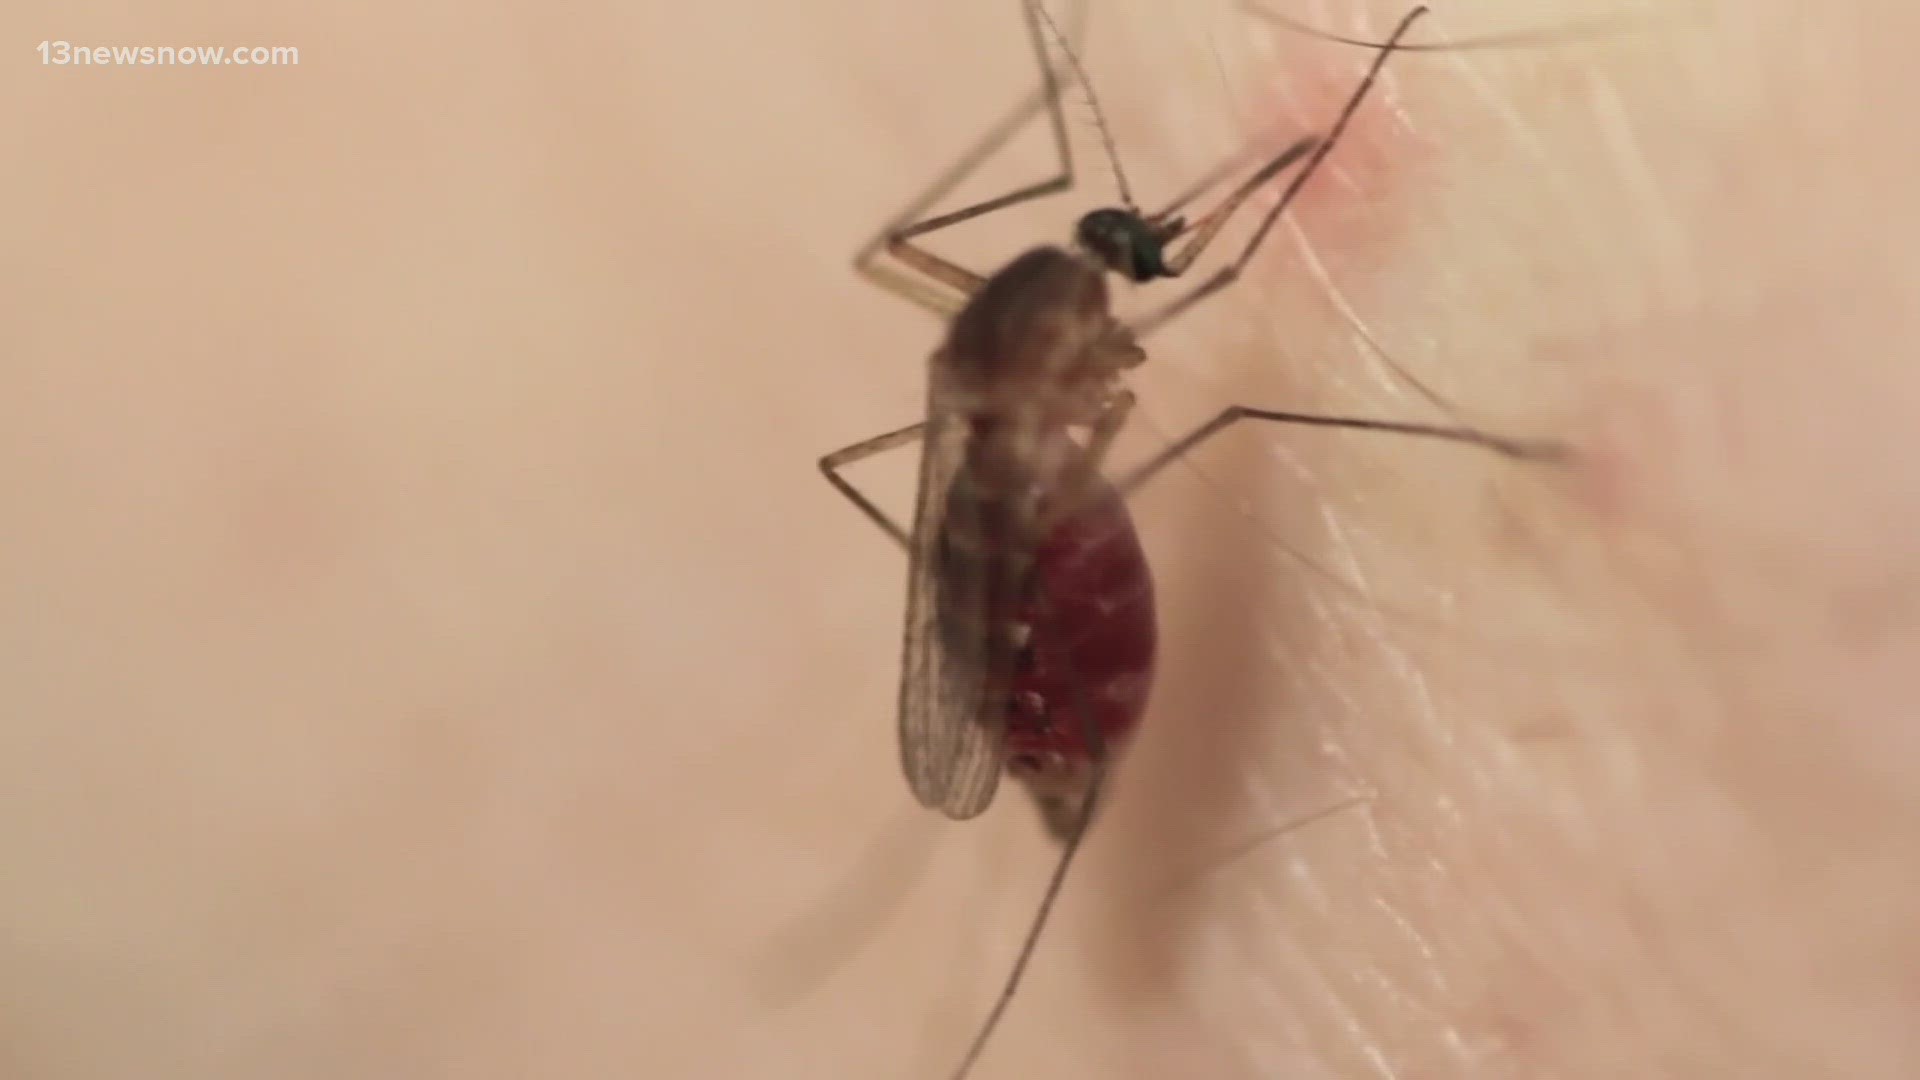 The mosquito sample was collected in the Edgewater/Larchmont neighborhood on Sept. 14.